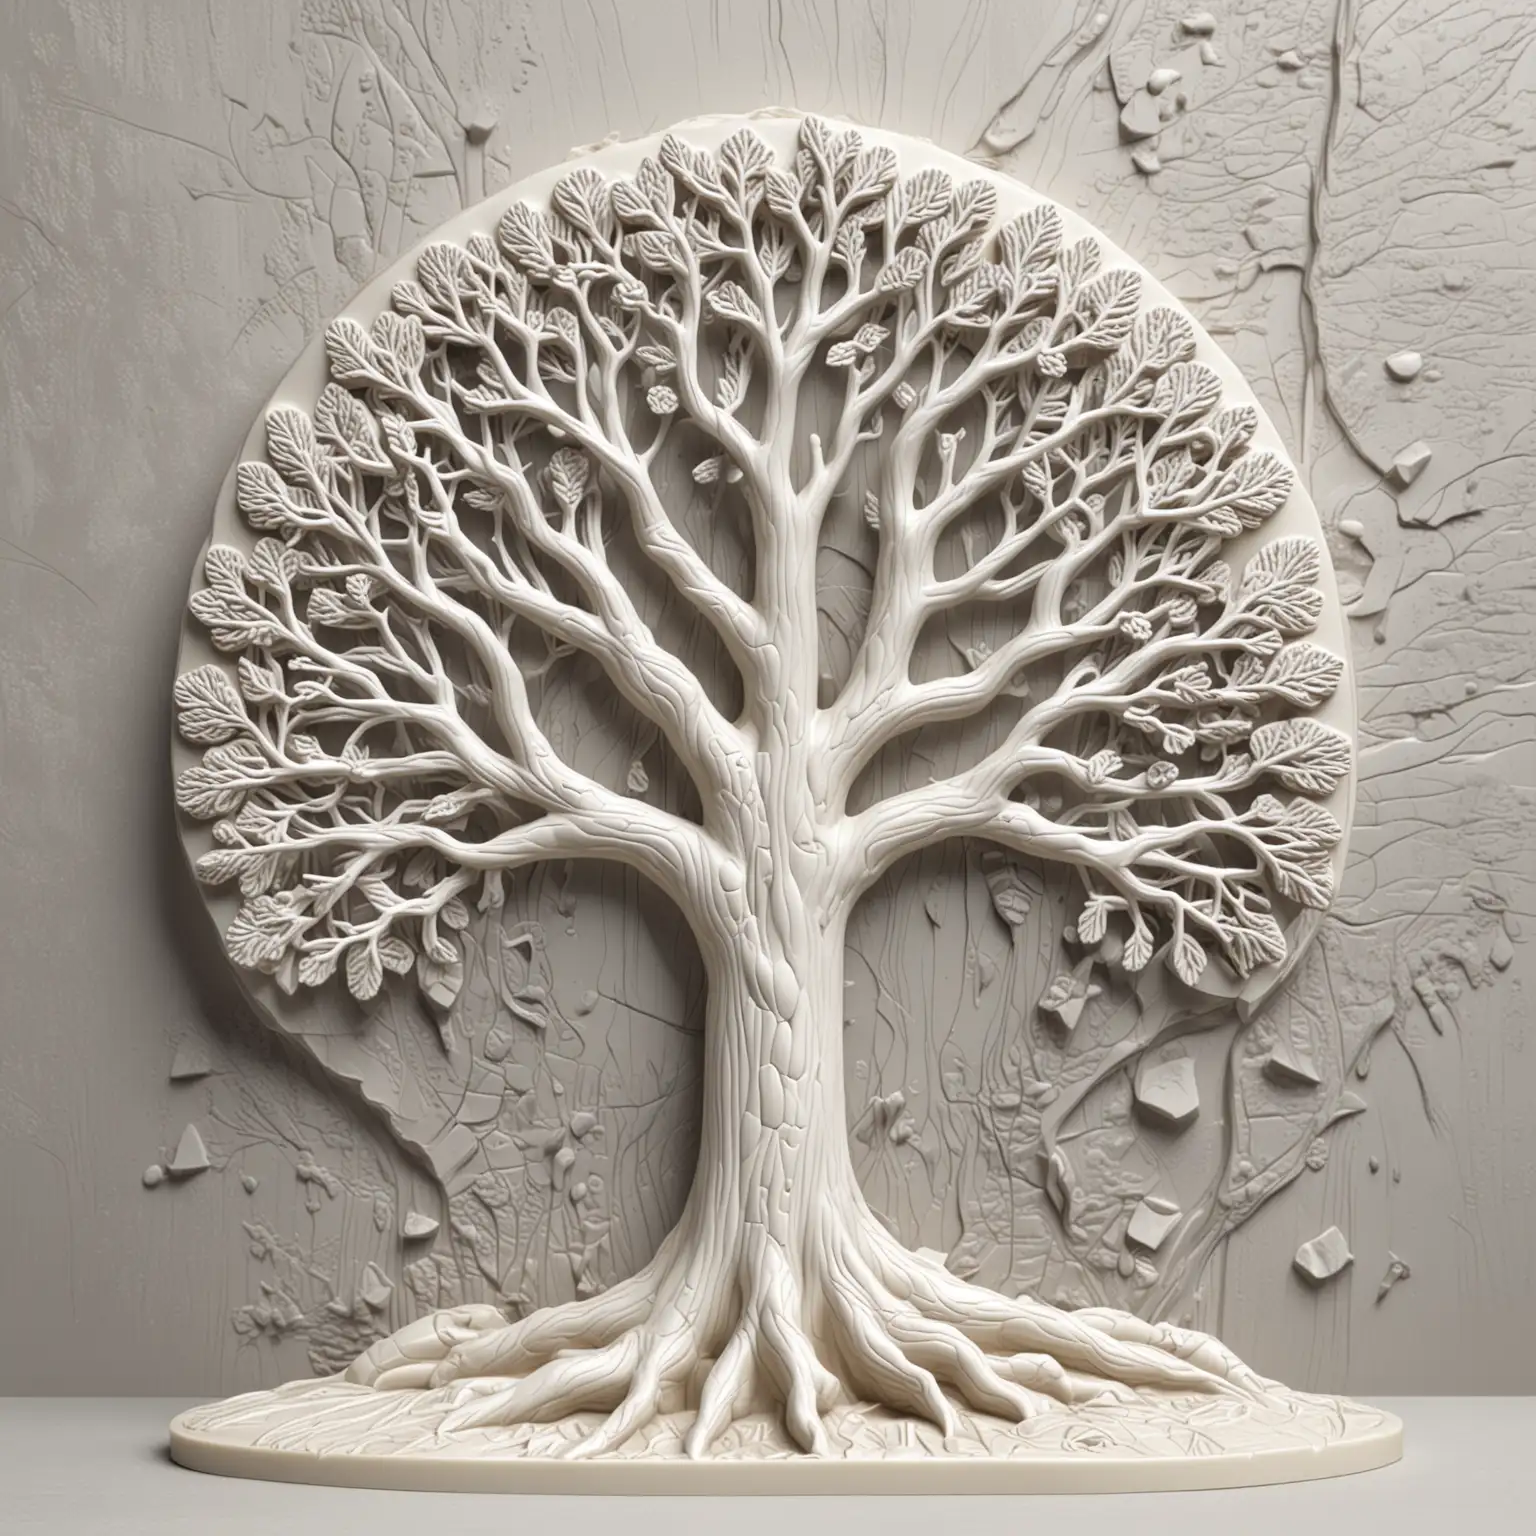 Translucent White Chocolate Tree Sculpture Intricately Carved 3D Relief in Topographical Gray Scale